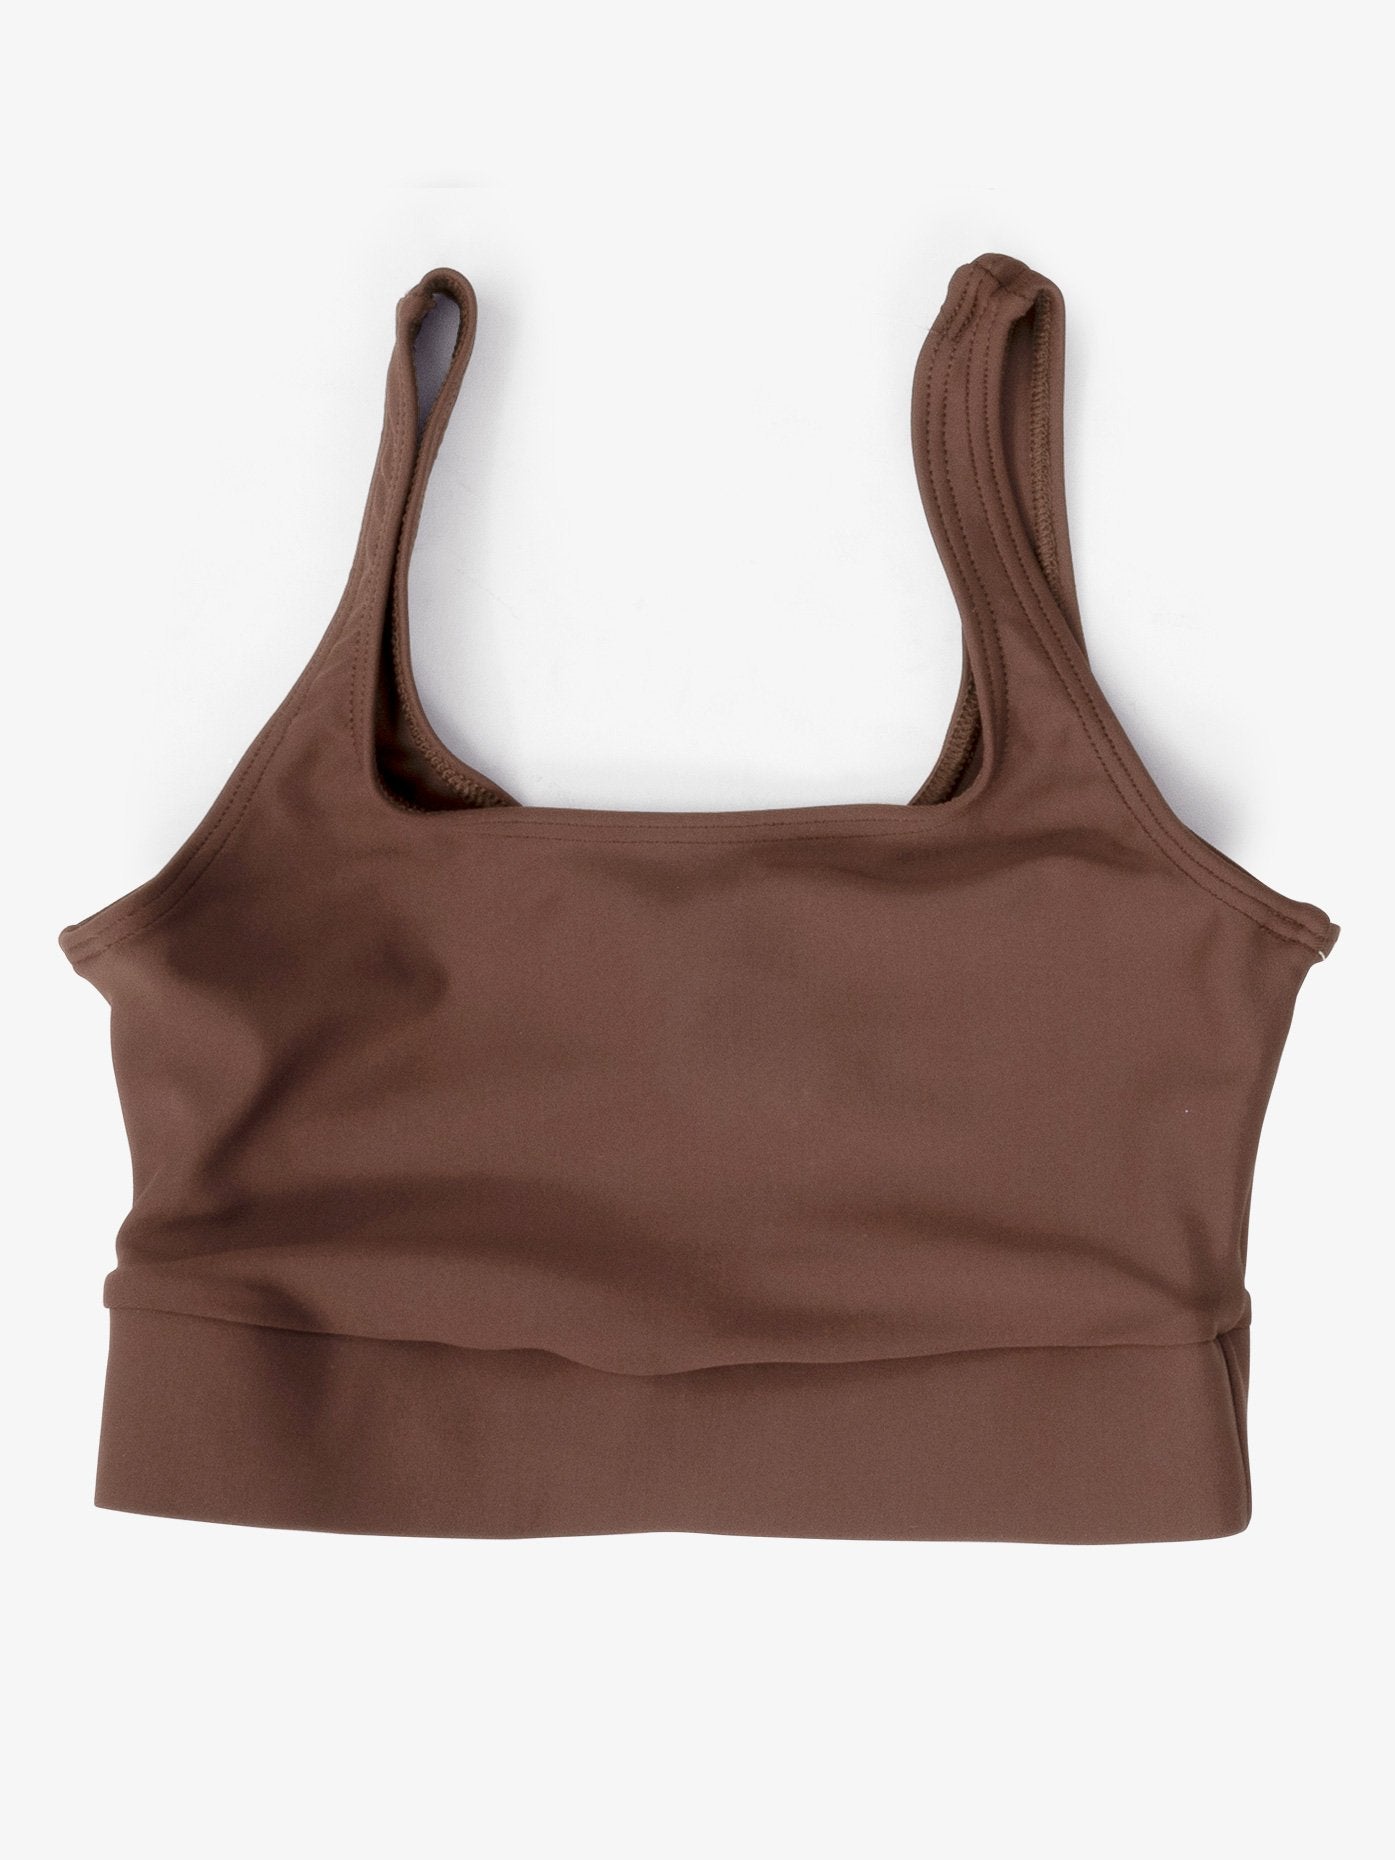 Women’s pinched back brown bra top